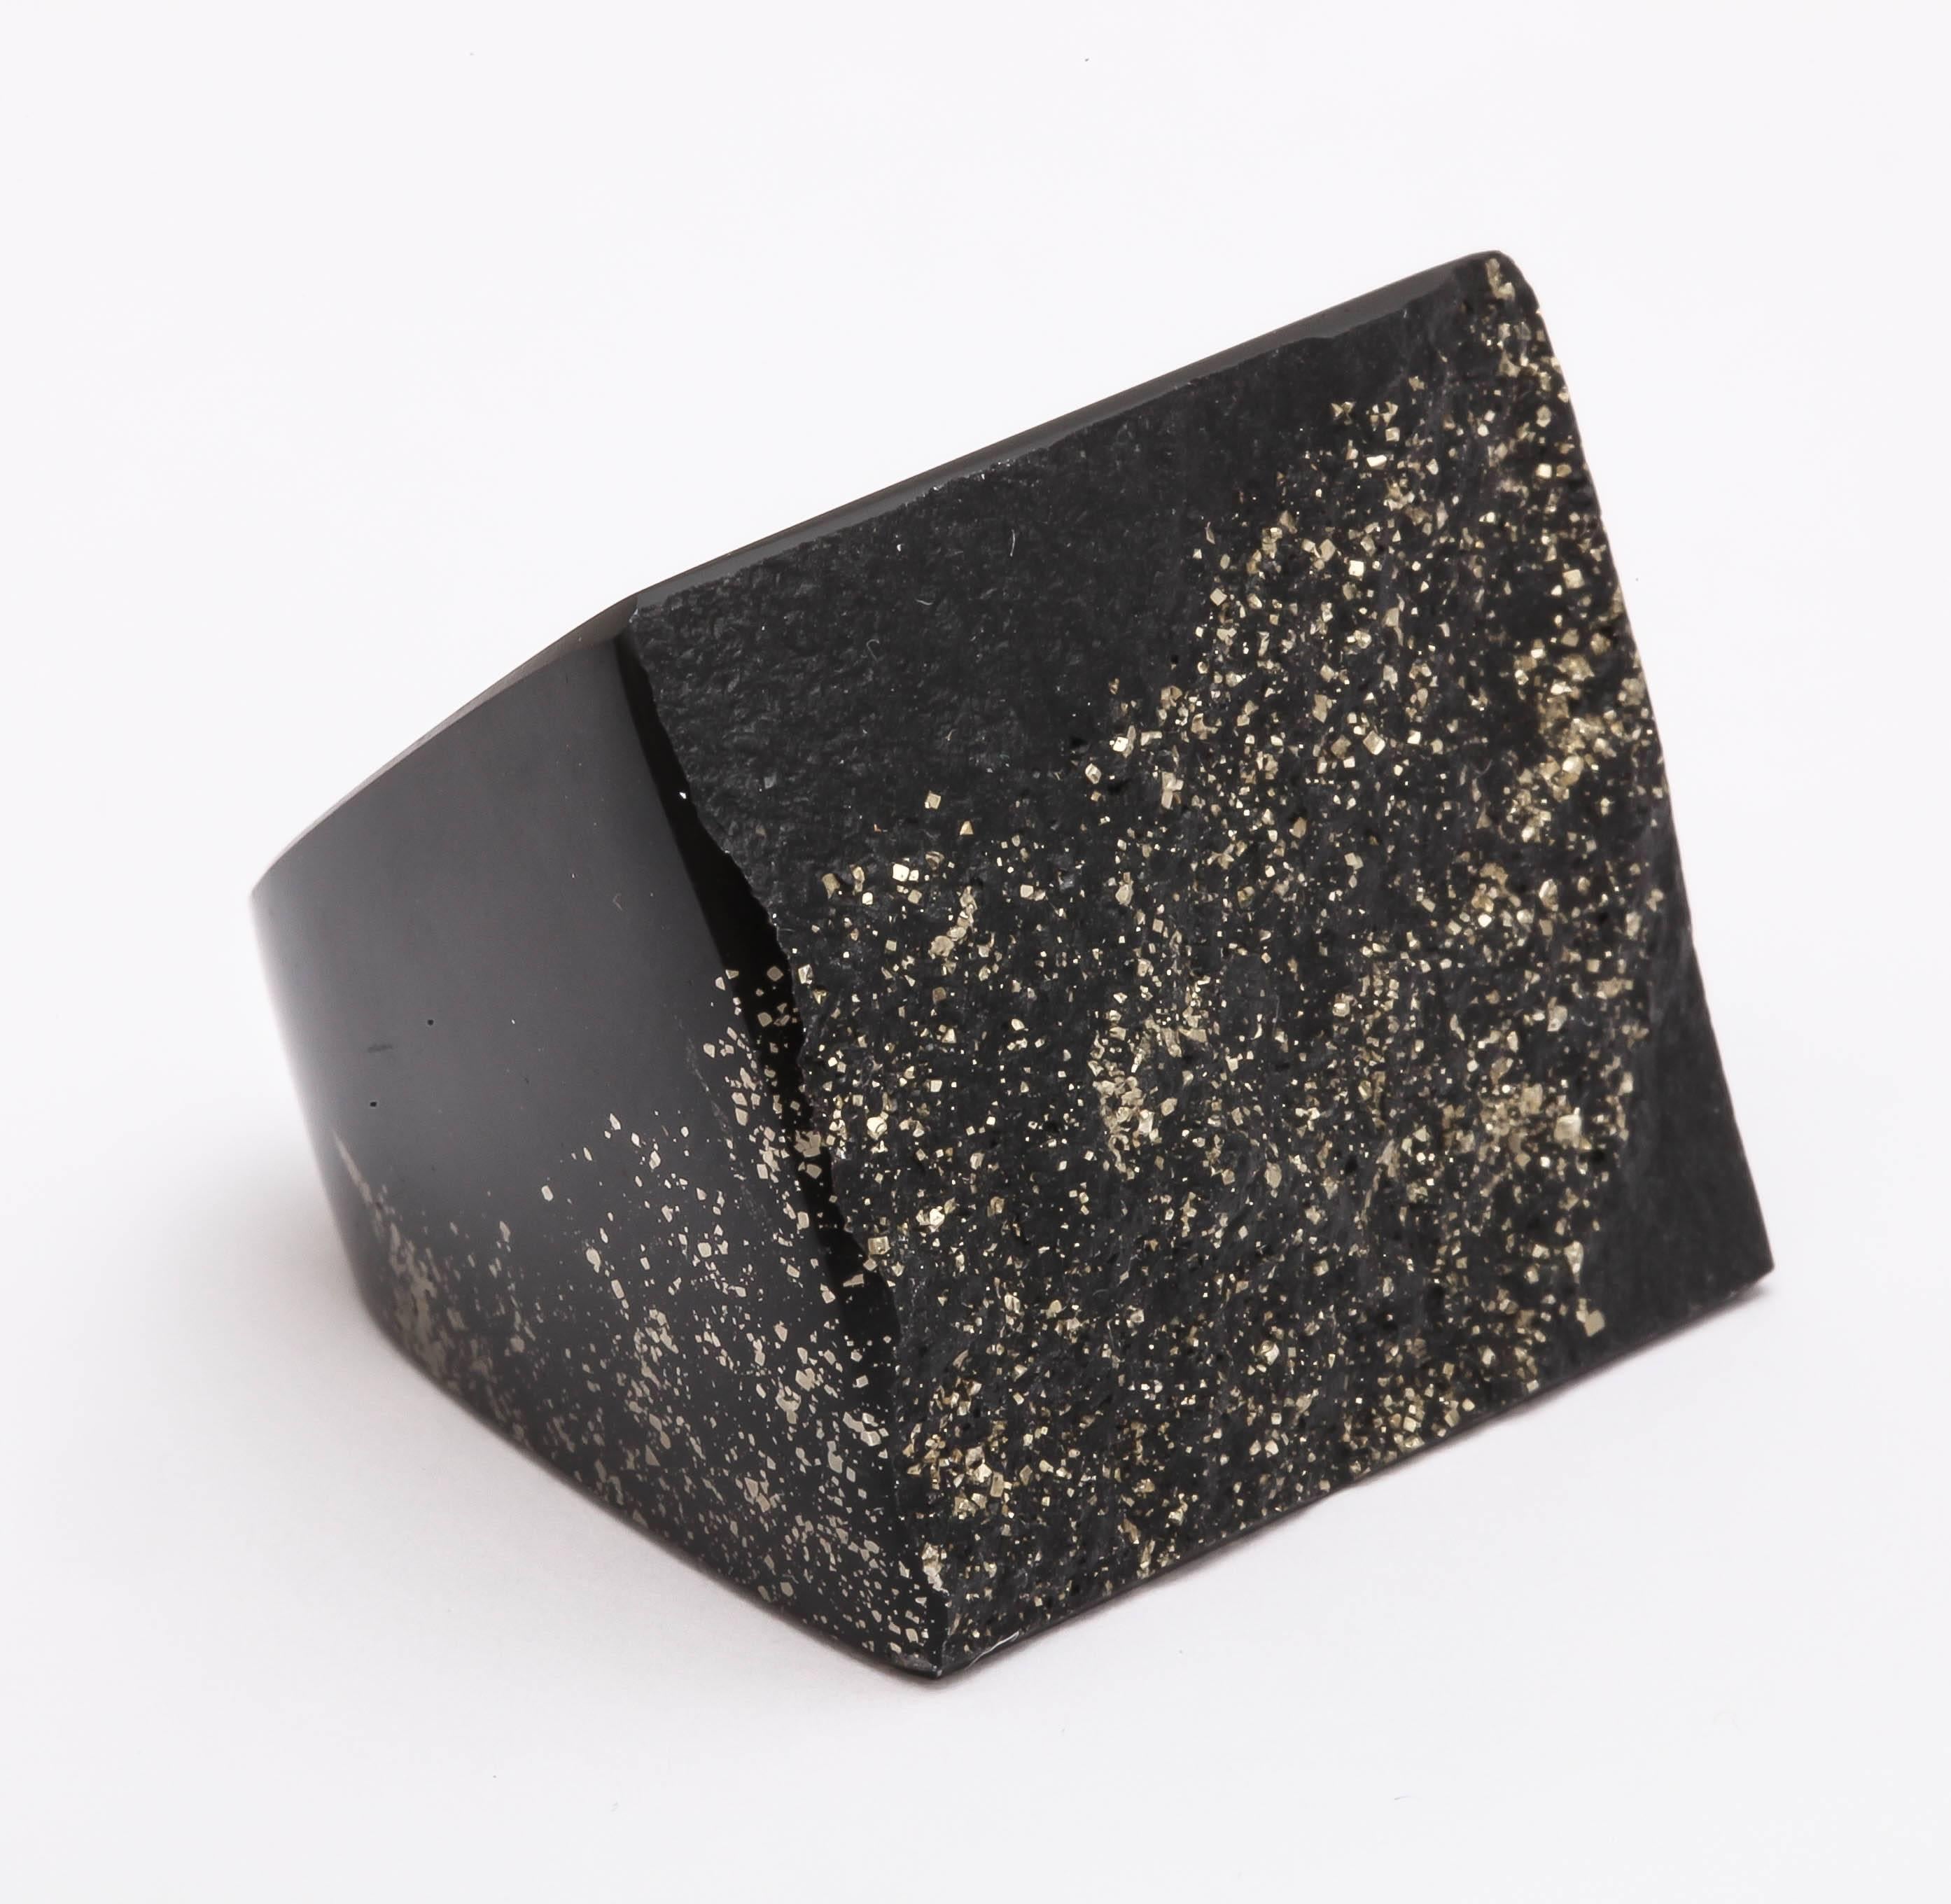 This ring is carved from Black Swiss marble with a galaxy of fool's gold (iron pyrite) sparkling 'stars' floating in the dark background. The ring size is 7/8.  This size of the top is about 35 mm wide and 30 mm high. A very unique, one of a kind